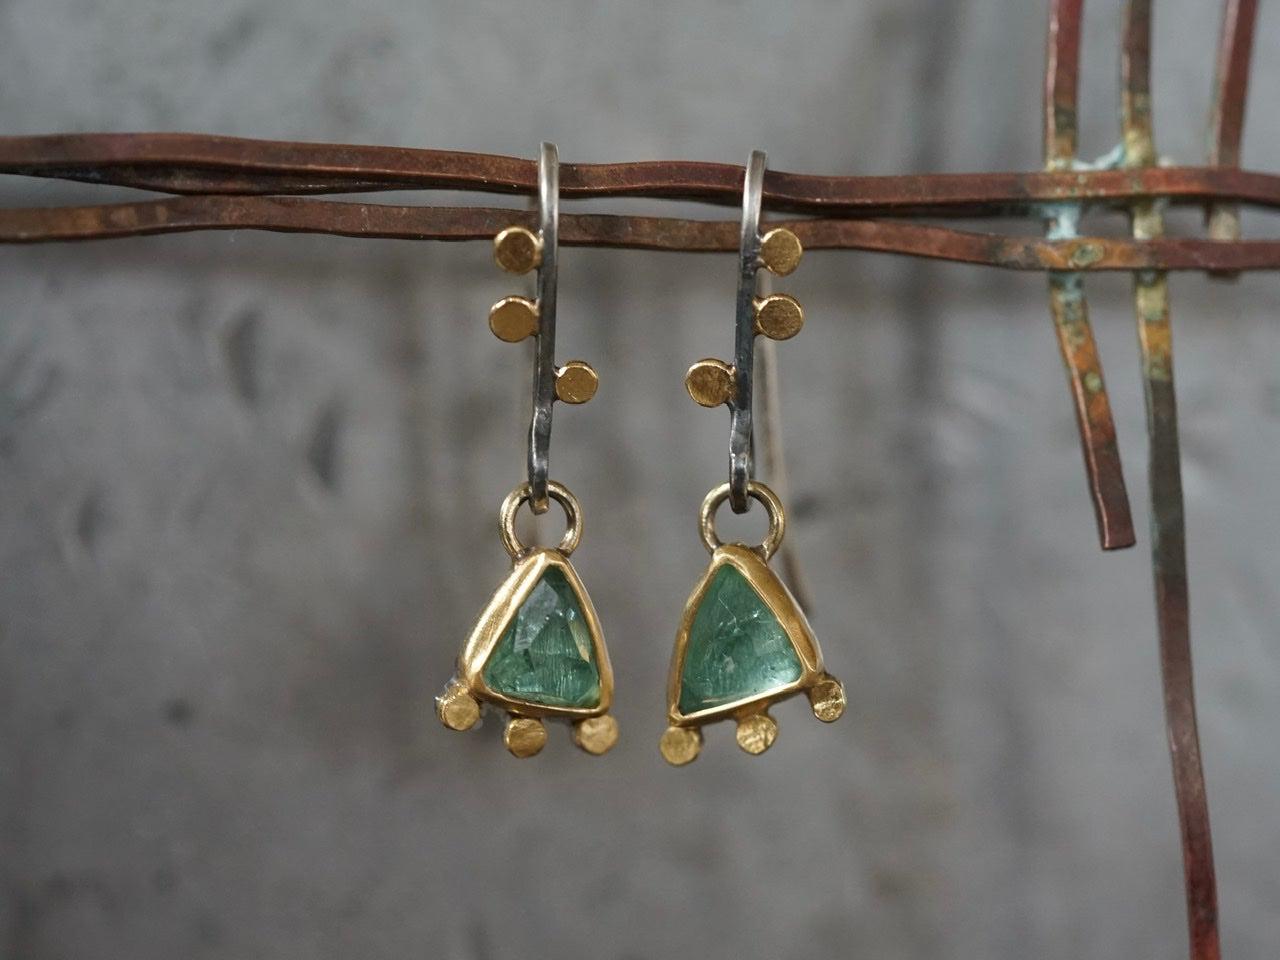 Exquisite delicate tourmaline and 22k gold drop earrings